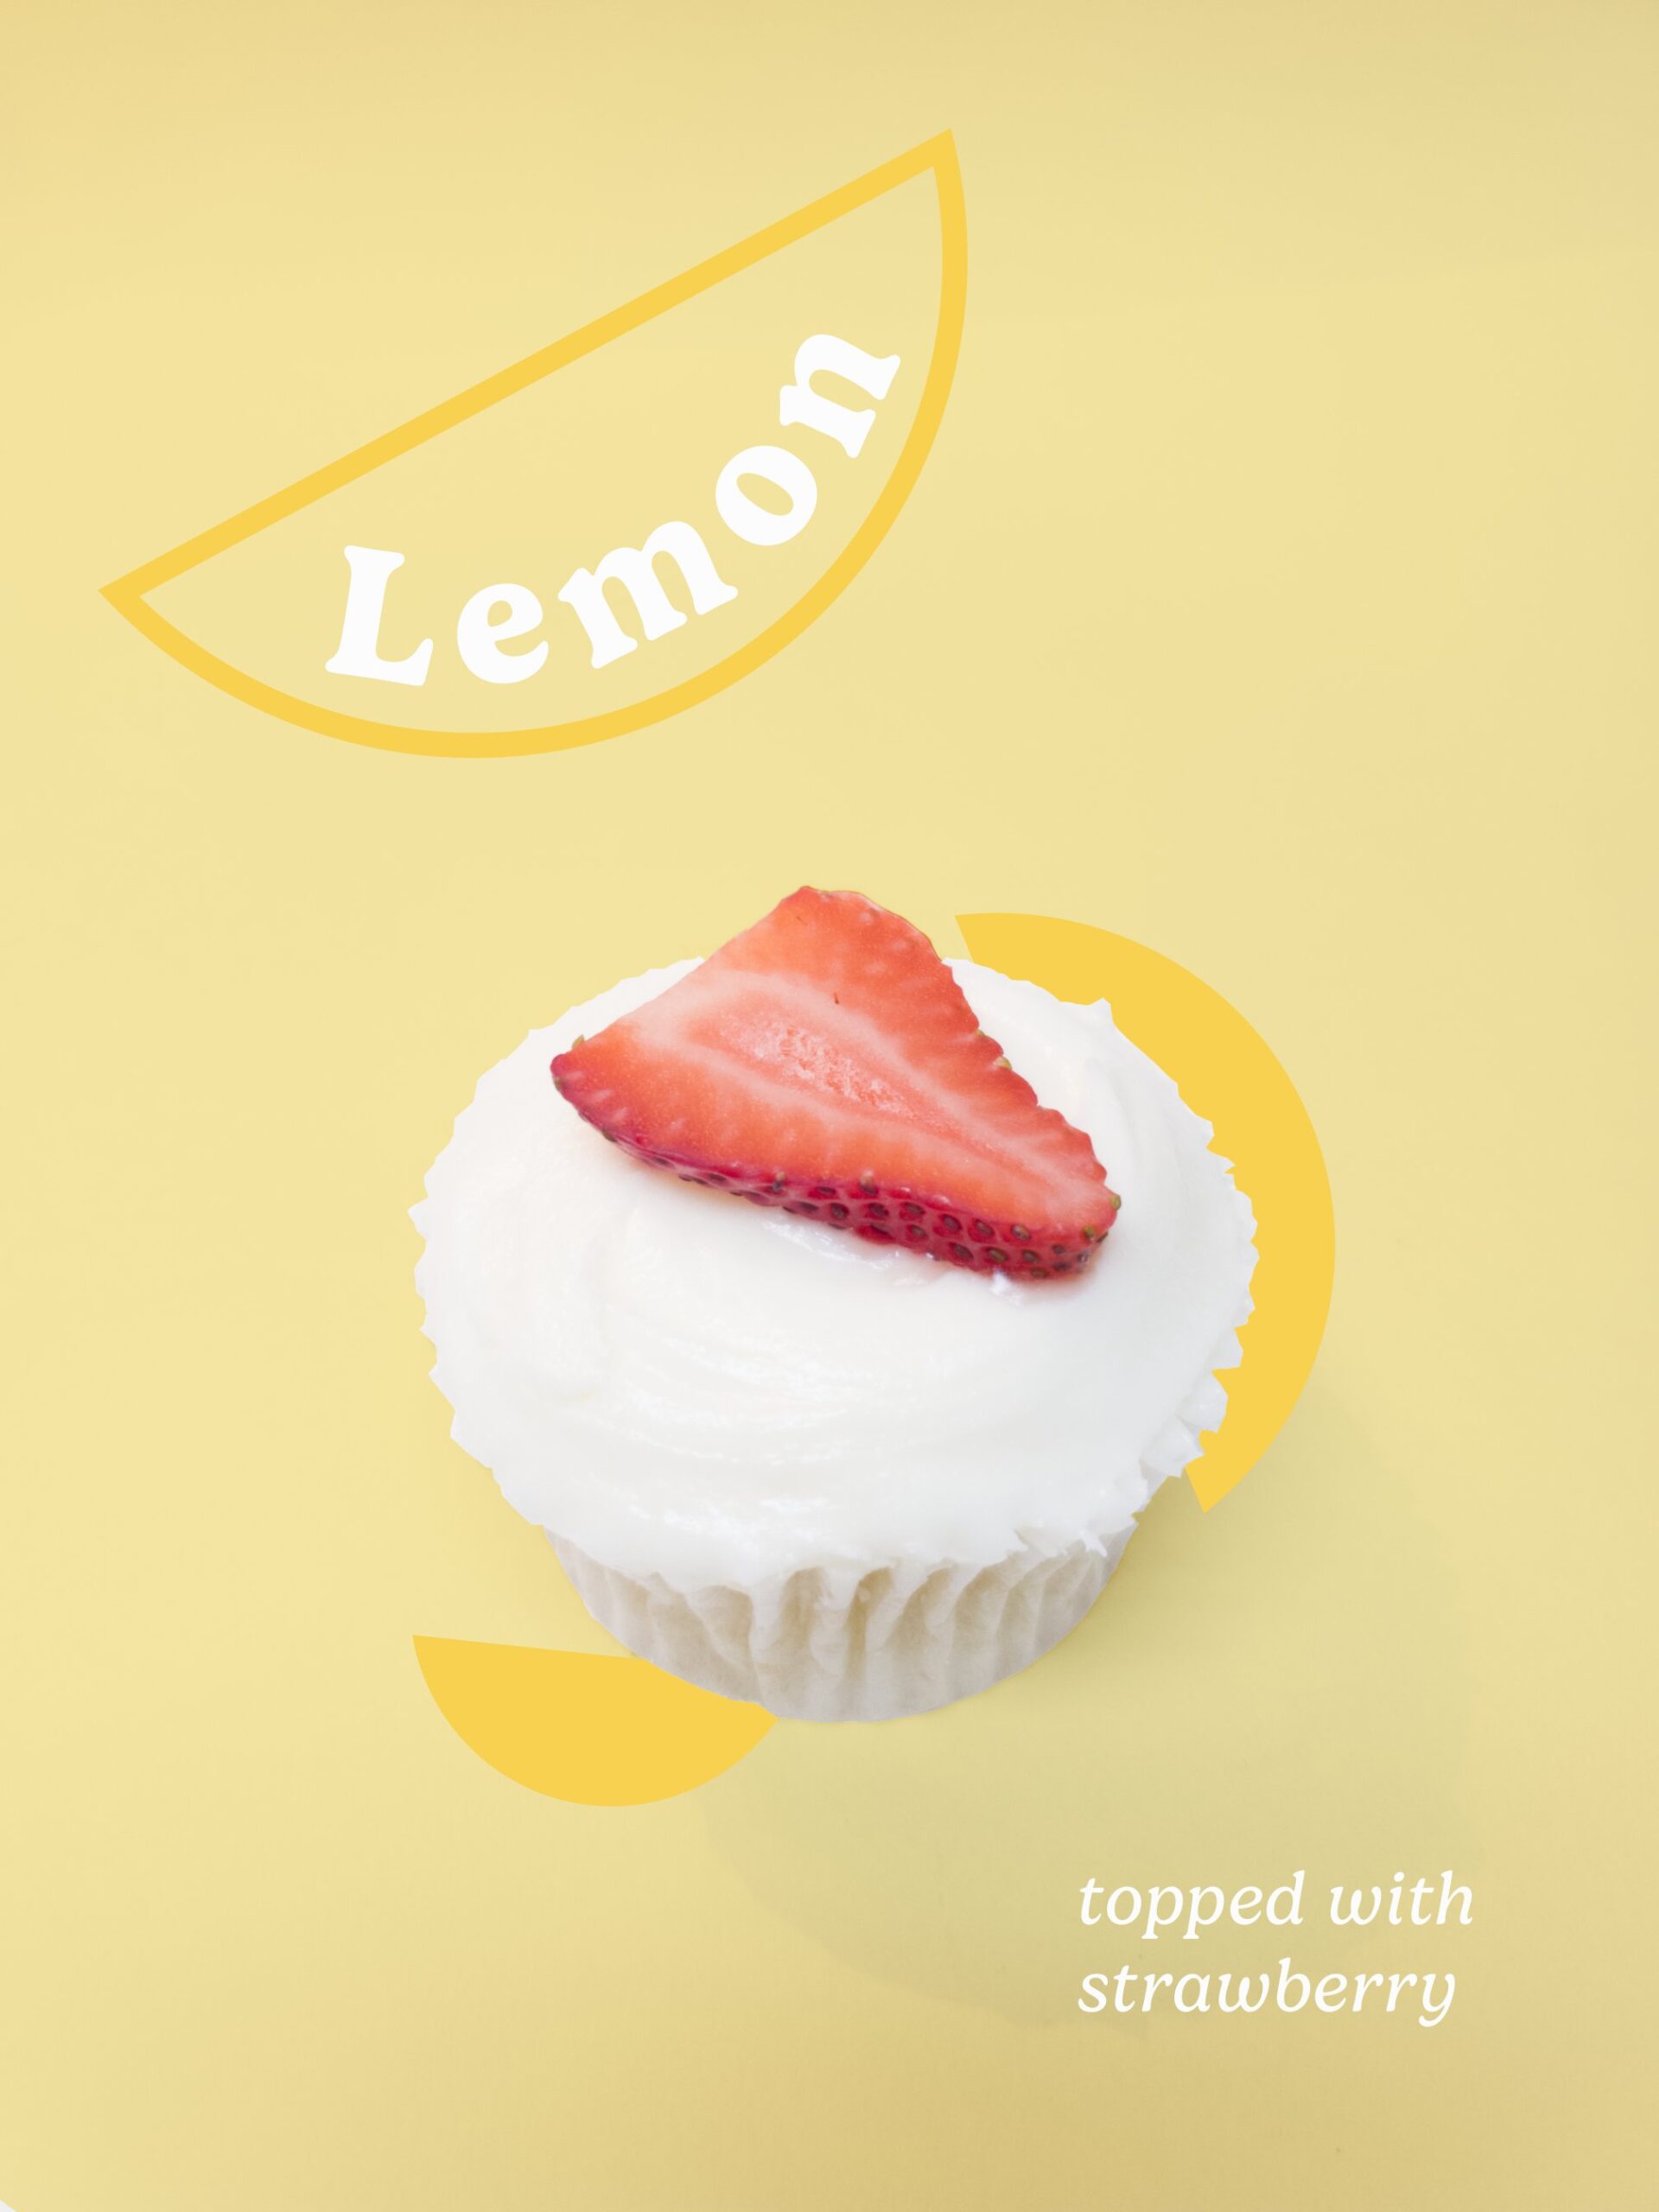 Photograph of a lemon cupcake with a strawberry slice on top on a light yellow background